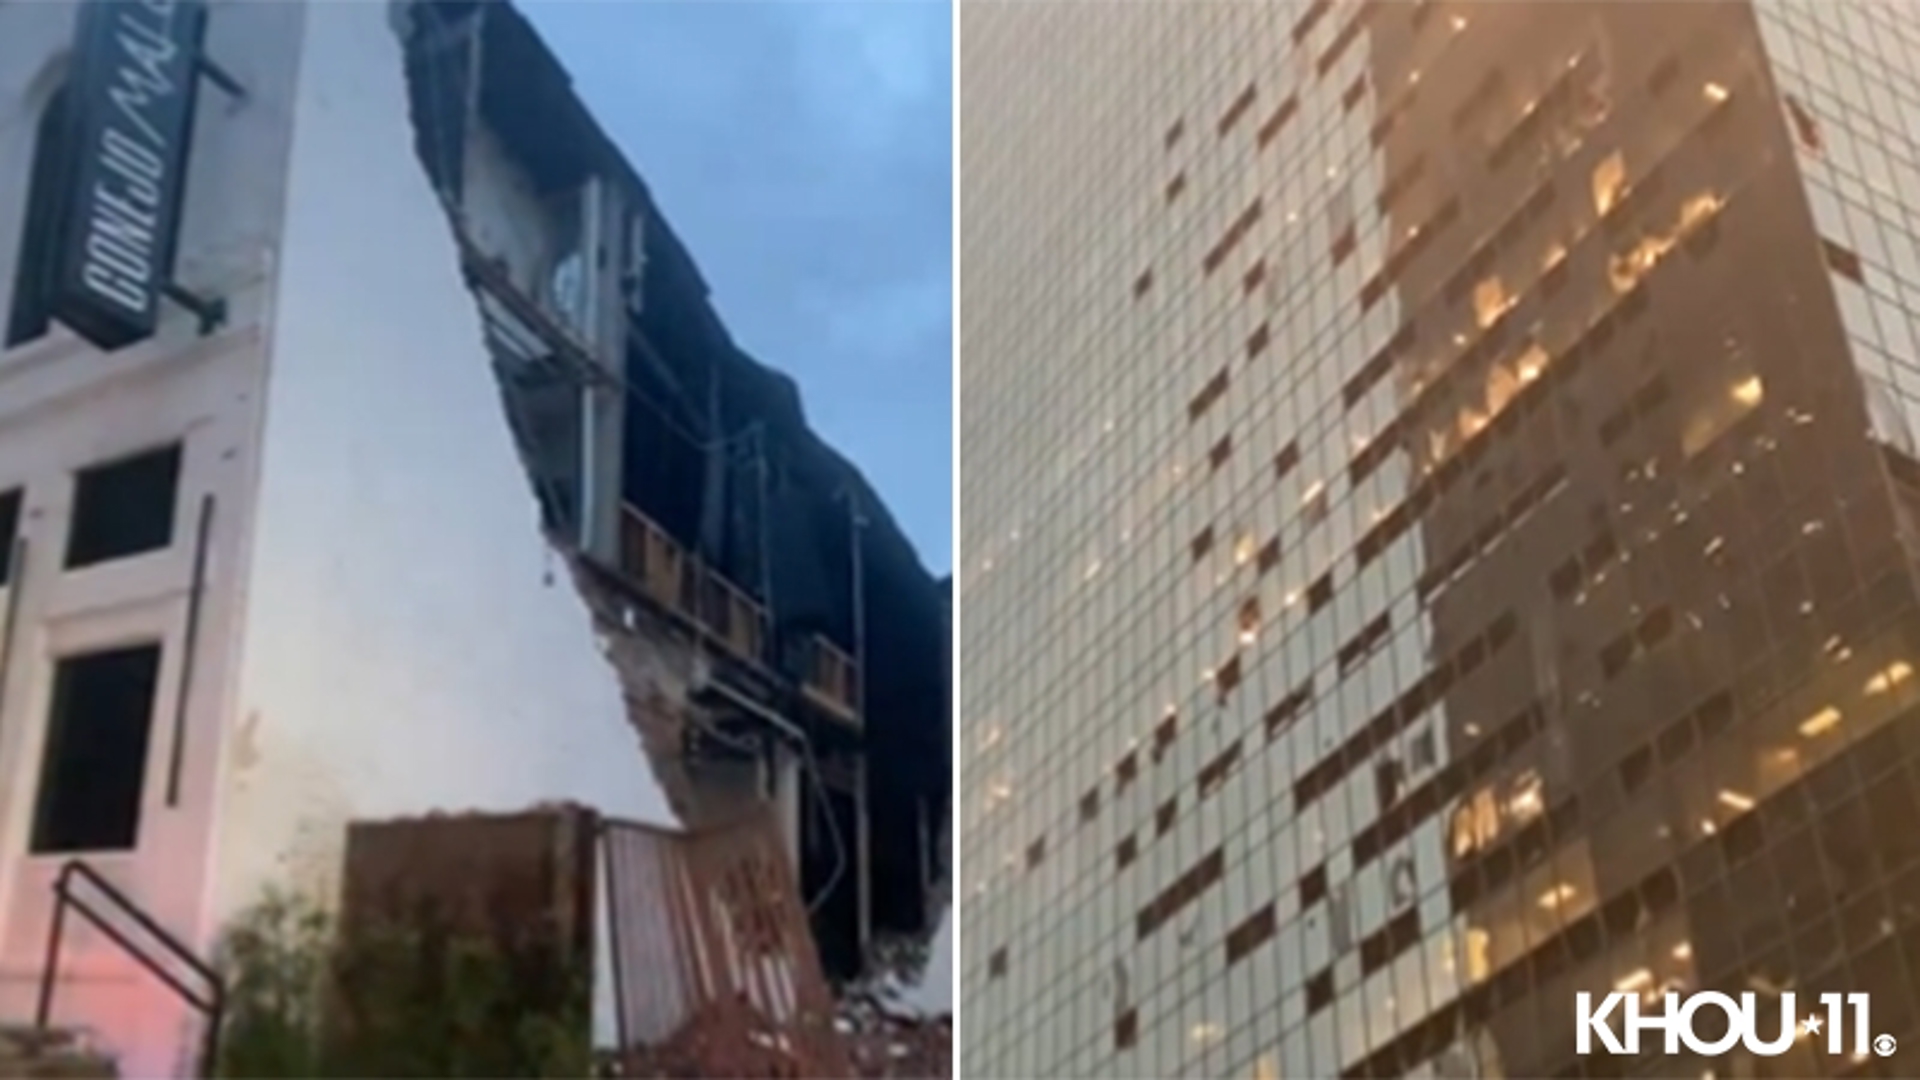 Our crews report heavy damage in downtown Houston after a fierce thunderstorm roared through the area Thursday evening. At least 4 people were killed.